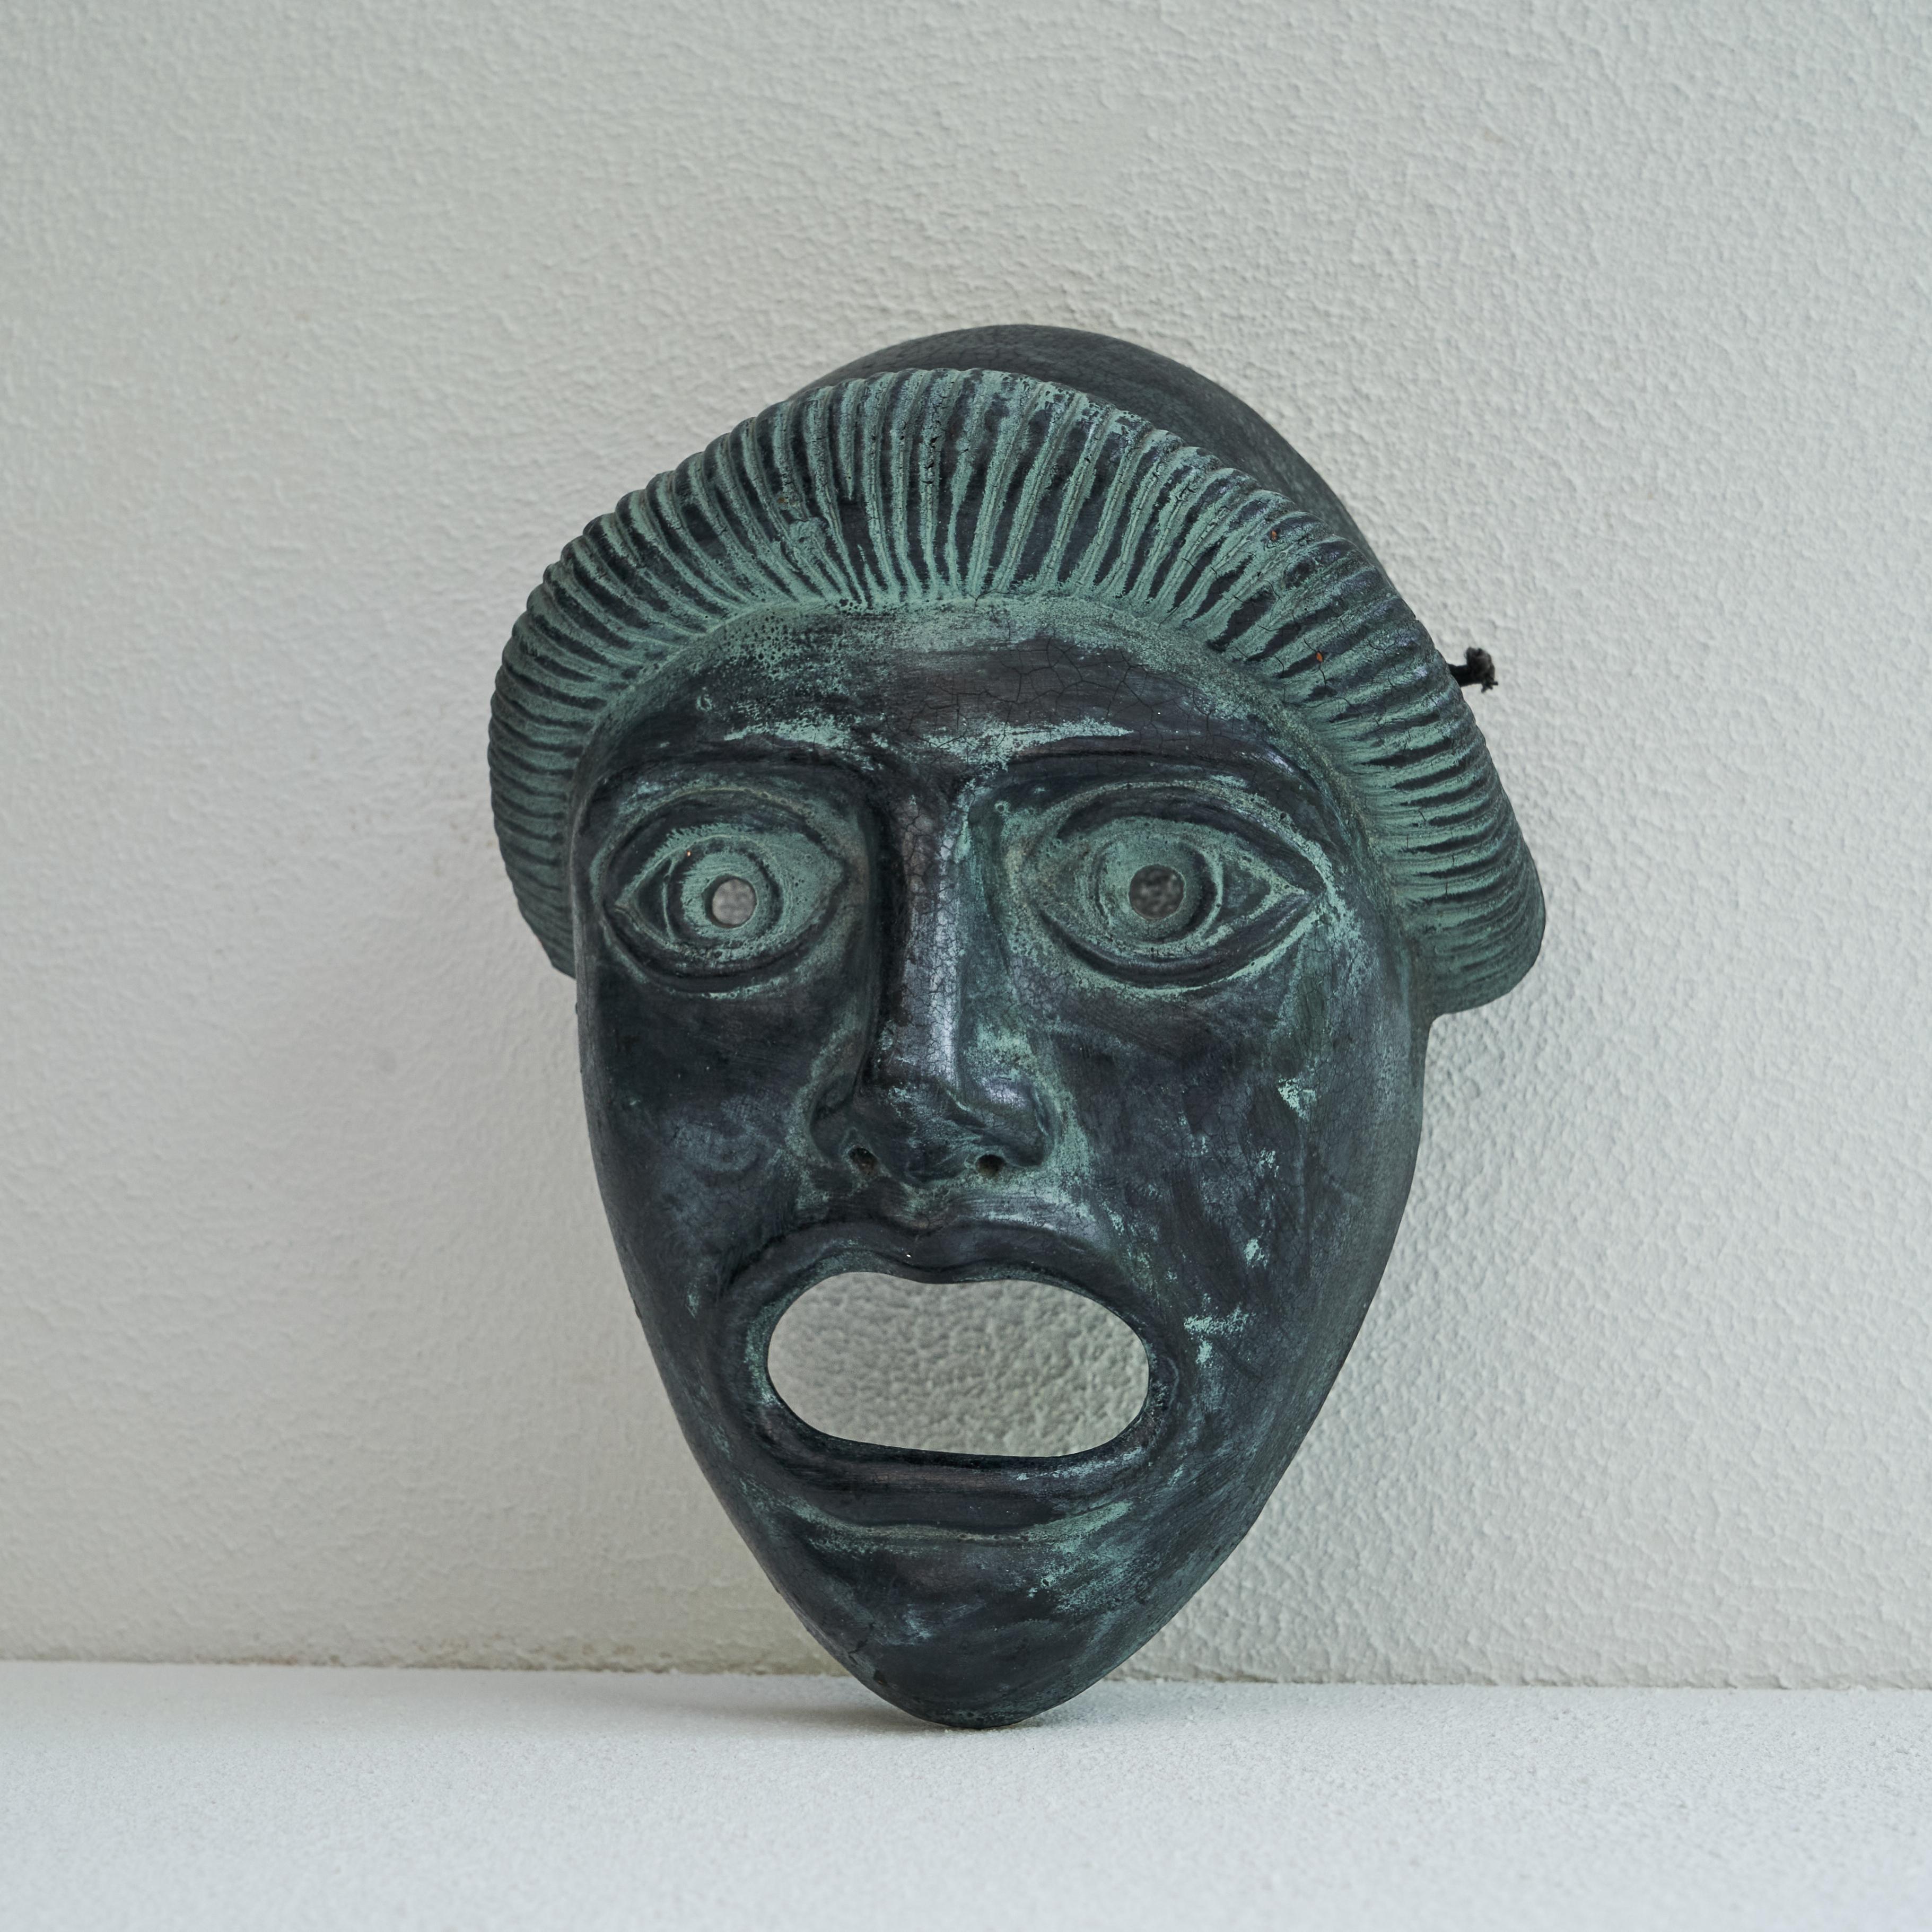 Mid-Century Decorative Mask. Greece, mid 20th century.

This is a beautiful ceramic decorative mask to display on your wall, made in Greece in the middle of the 20th century. Wonderful in shape and color and with a rich verdigris patination.